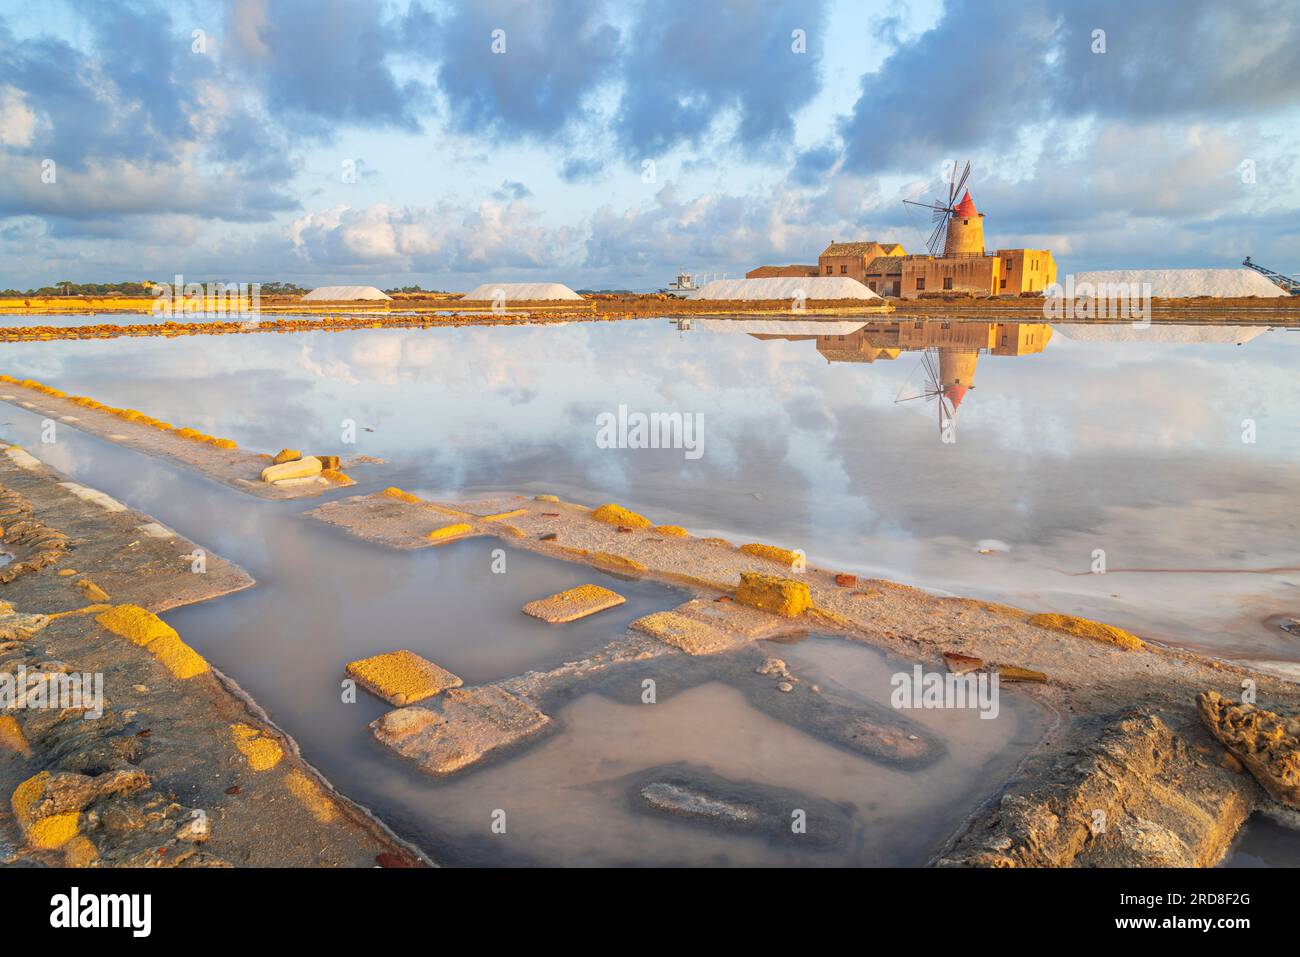 Reflection of the windmill in the salt flats at dawn, Saline Ettore e Infersa, Marsala, province of Trapani, Sicily, Italy, Mediterranean, Europe Stock Photo